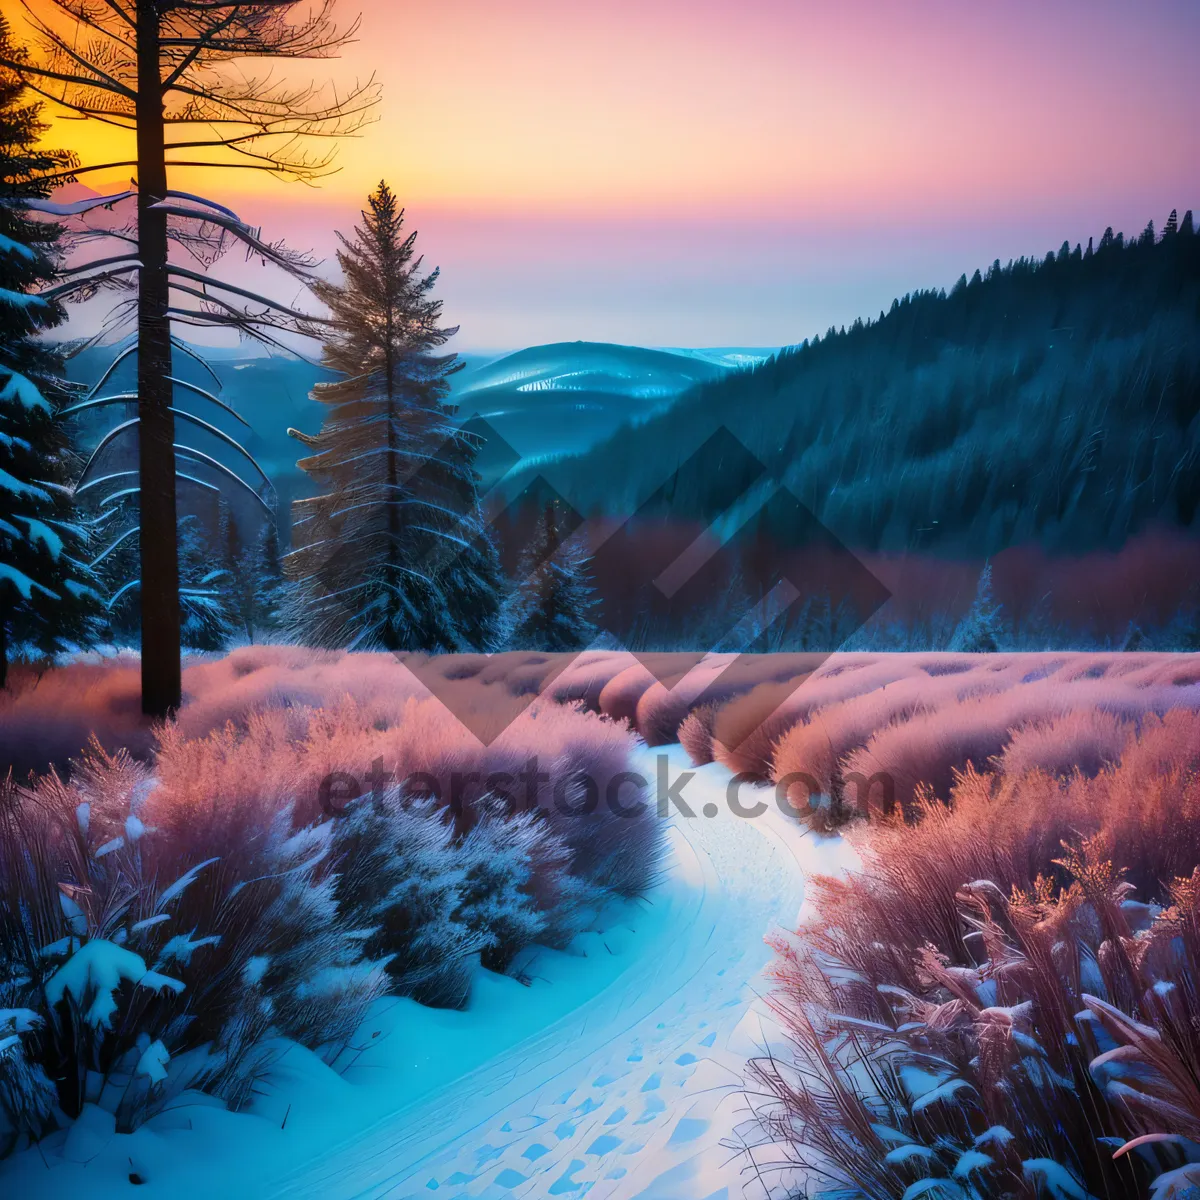 Picture of Scenic Winter Wonderland - Majestic Snow-Covered Forest